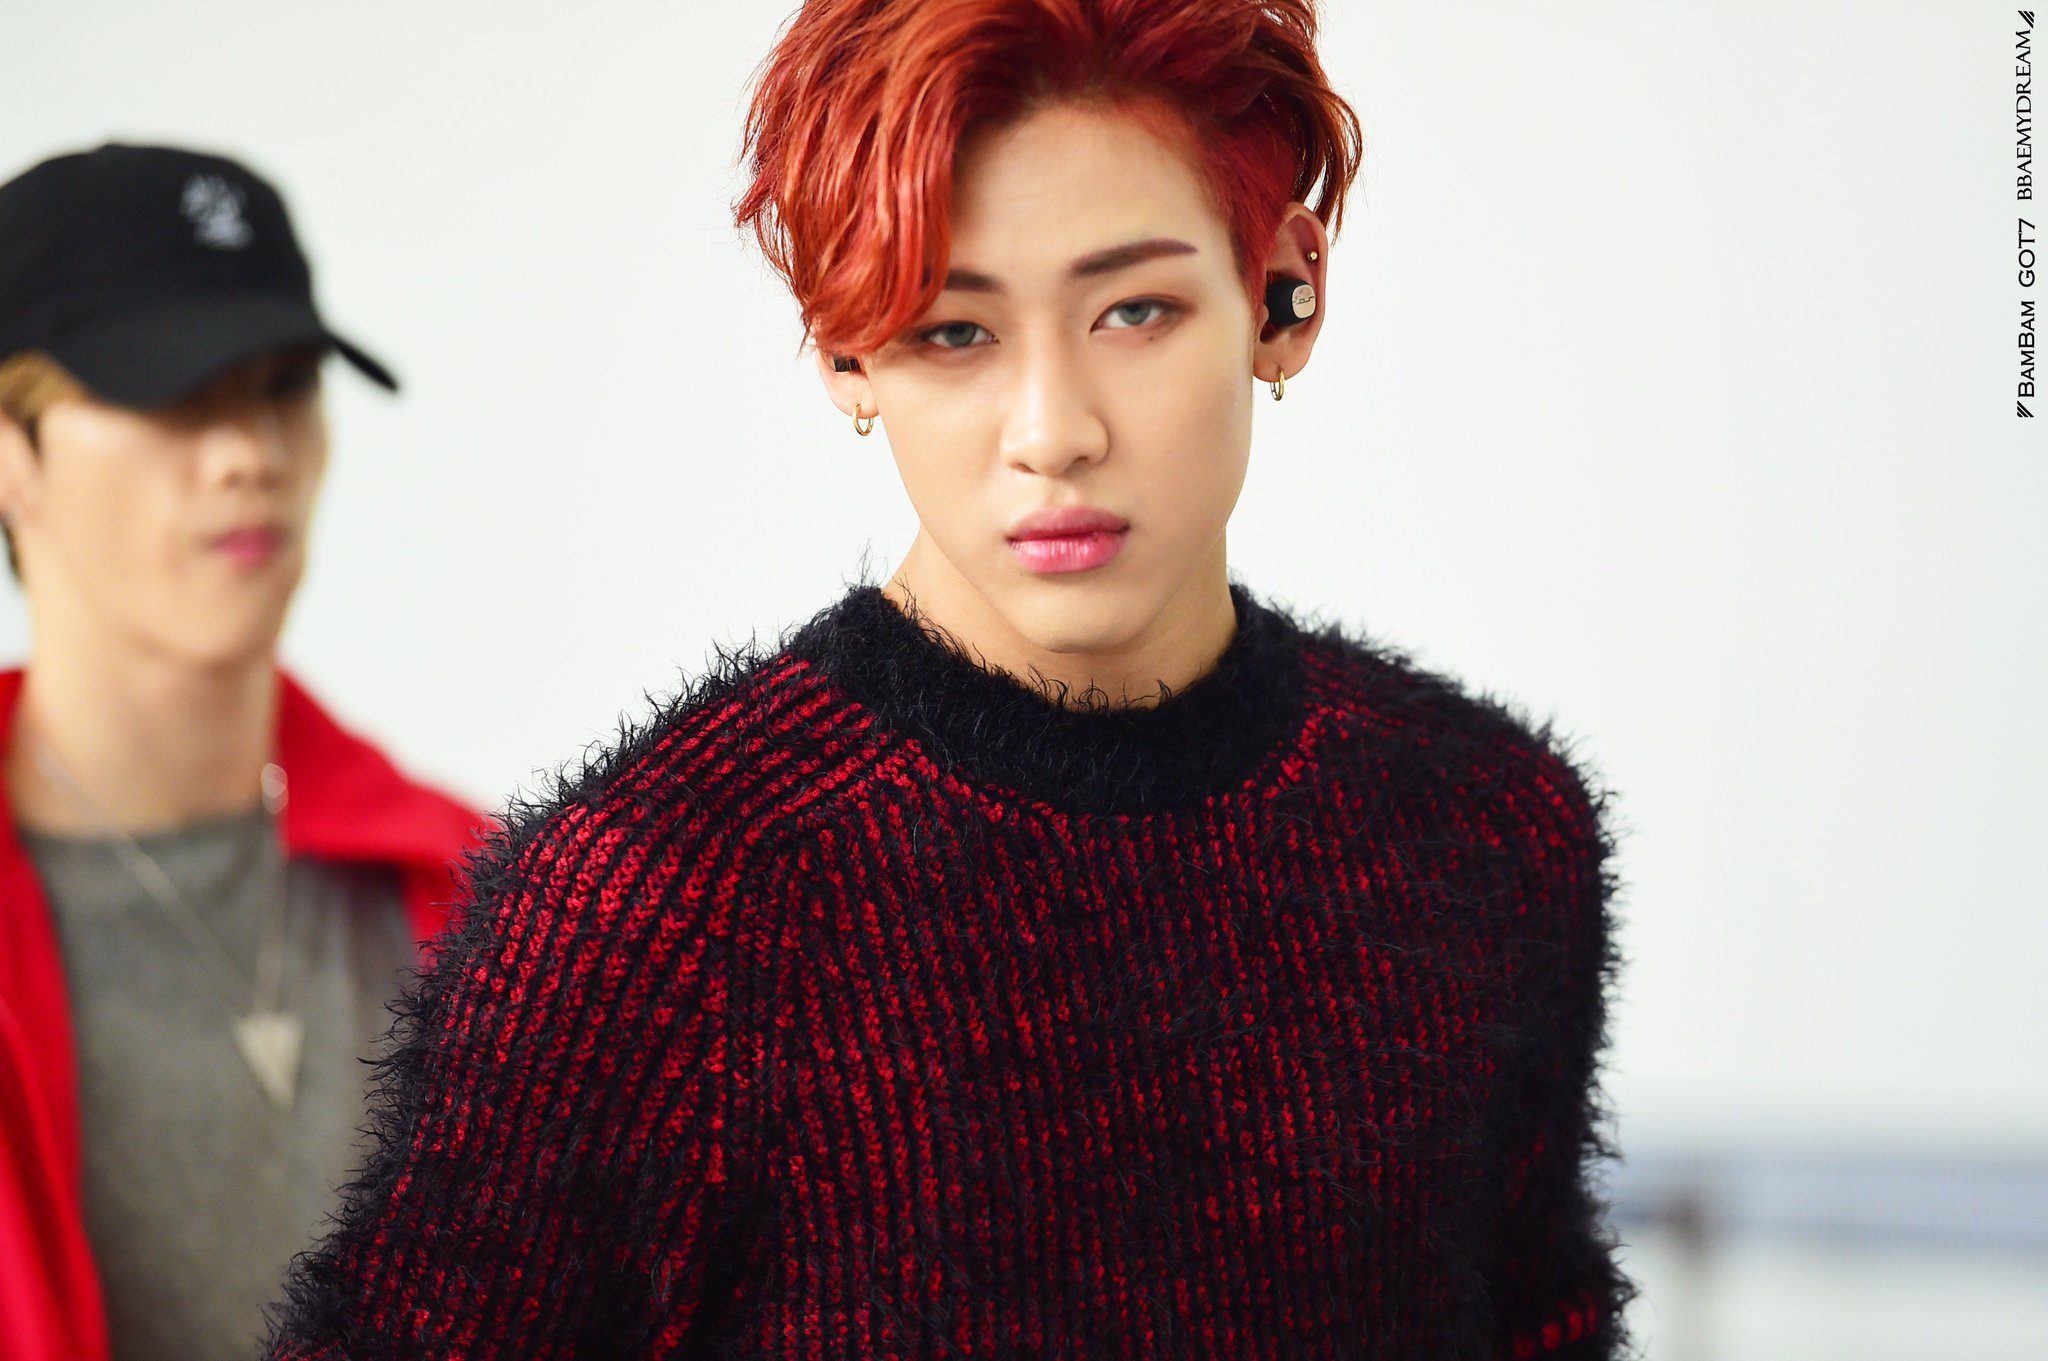 AhGases Rejoice As BamBam Is Exempt From Military Service!!